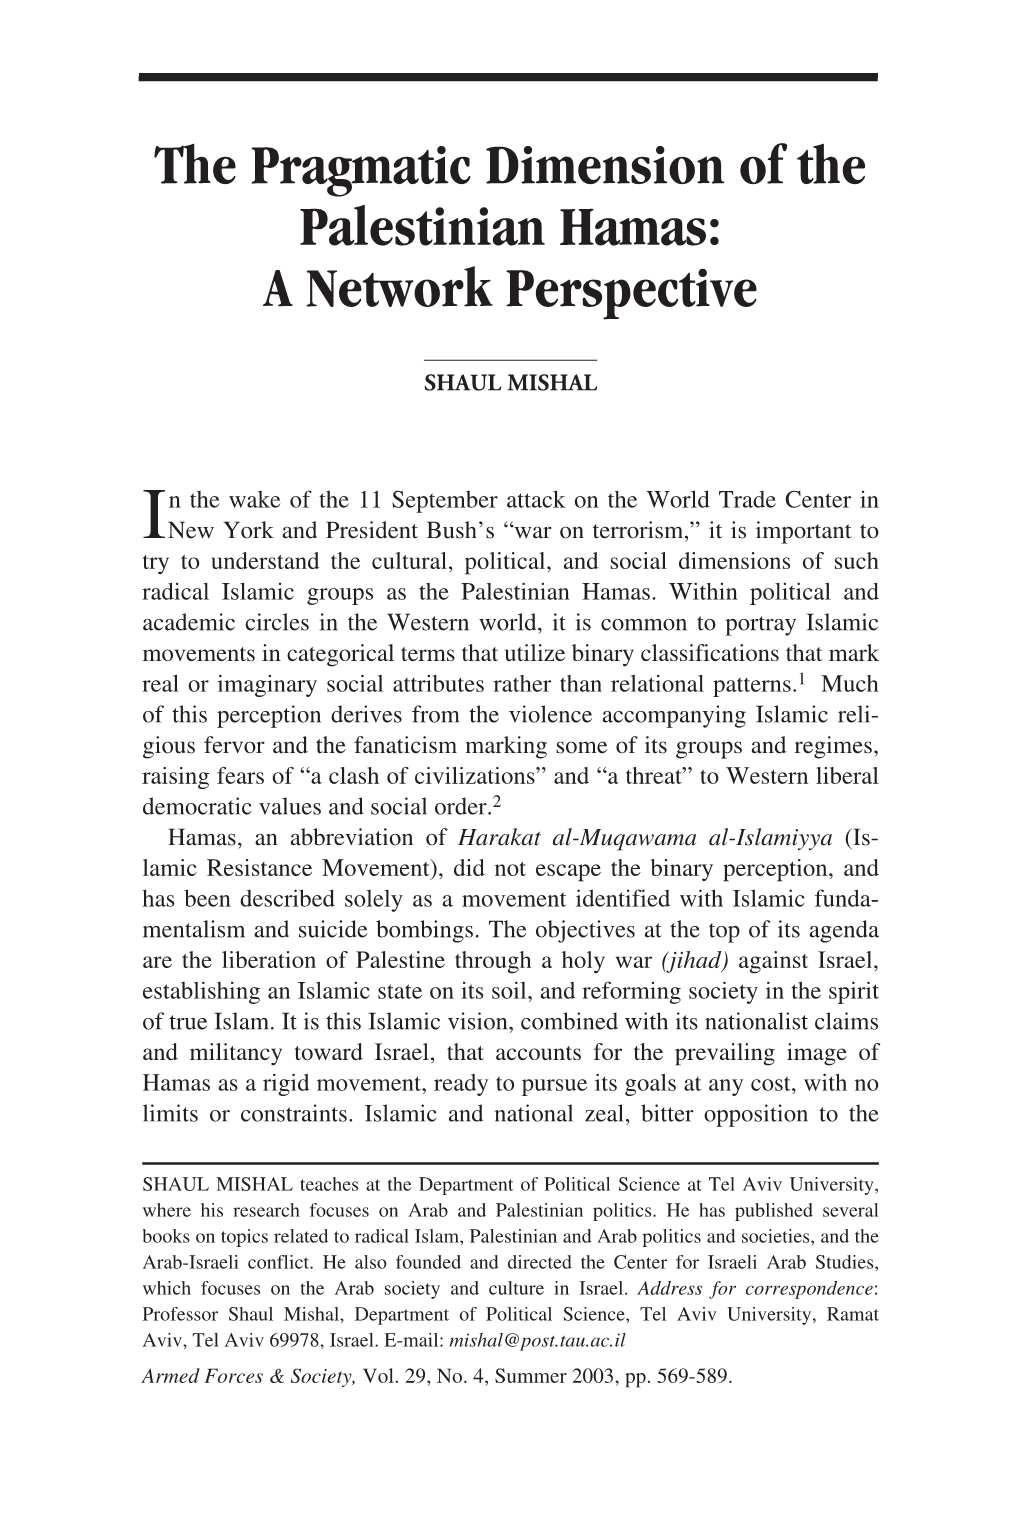 The Pragmatic Dimension of the Palestinian Hamas: a Network Perspective